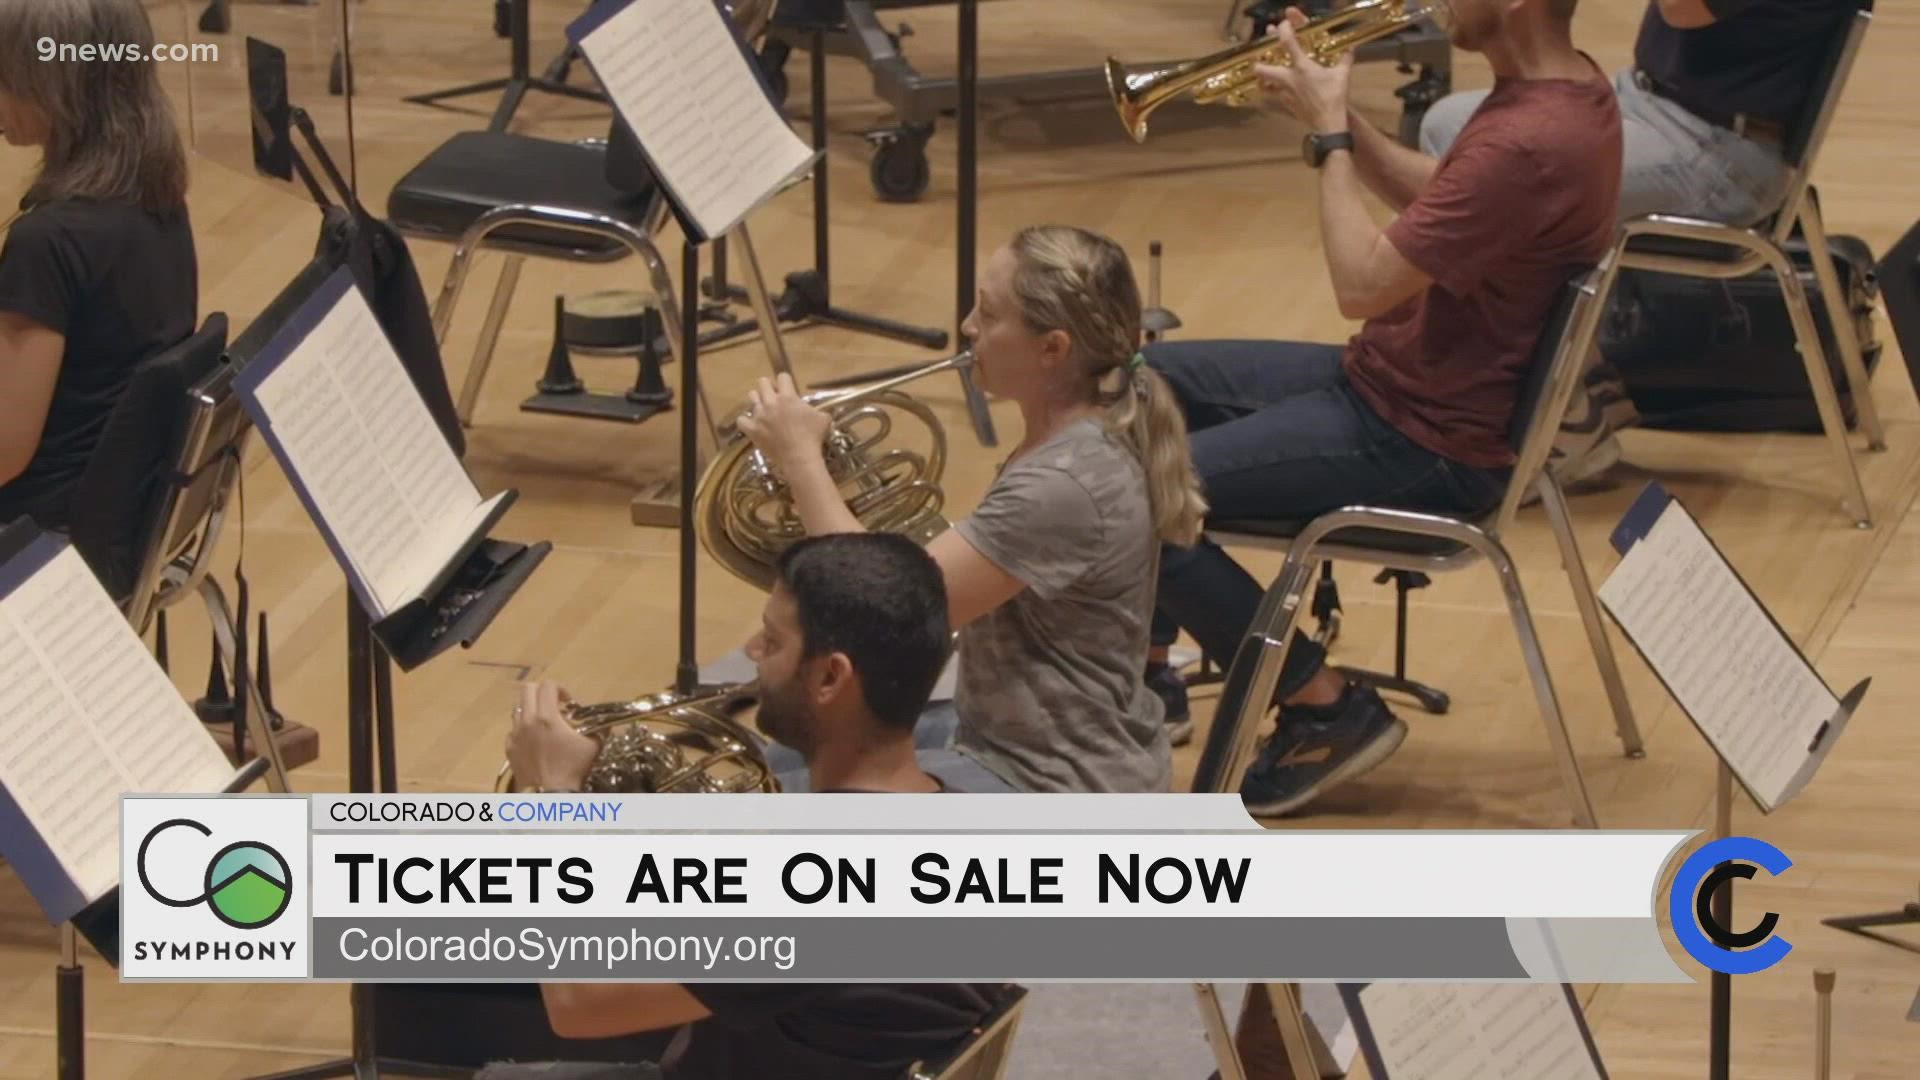 Tickets are on sale now! Visit ColoradoSymphony.org or call 303.623.7876 to get your tickets today.